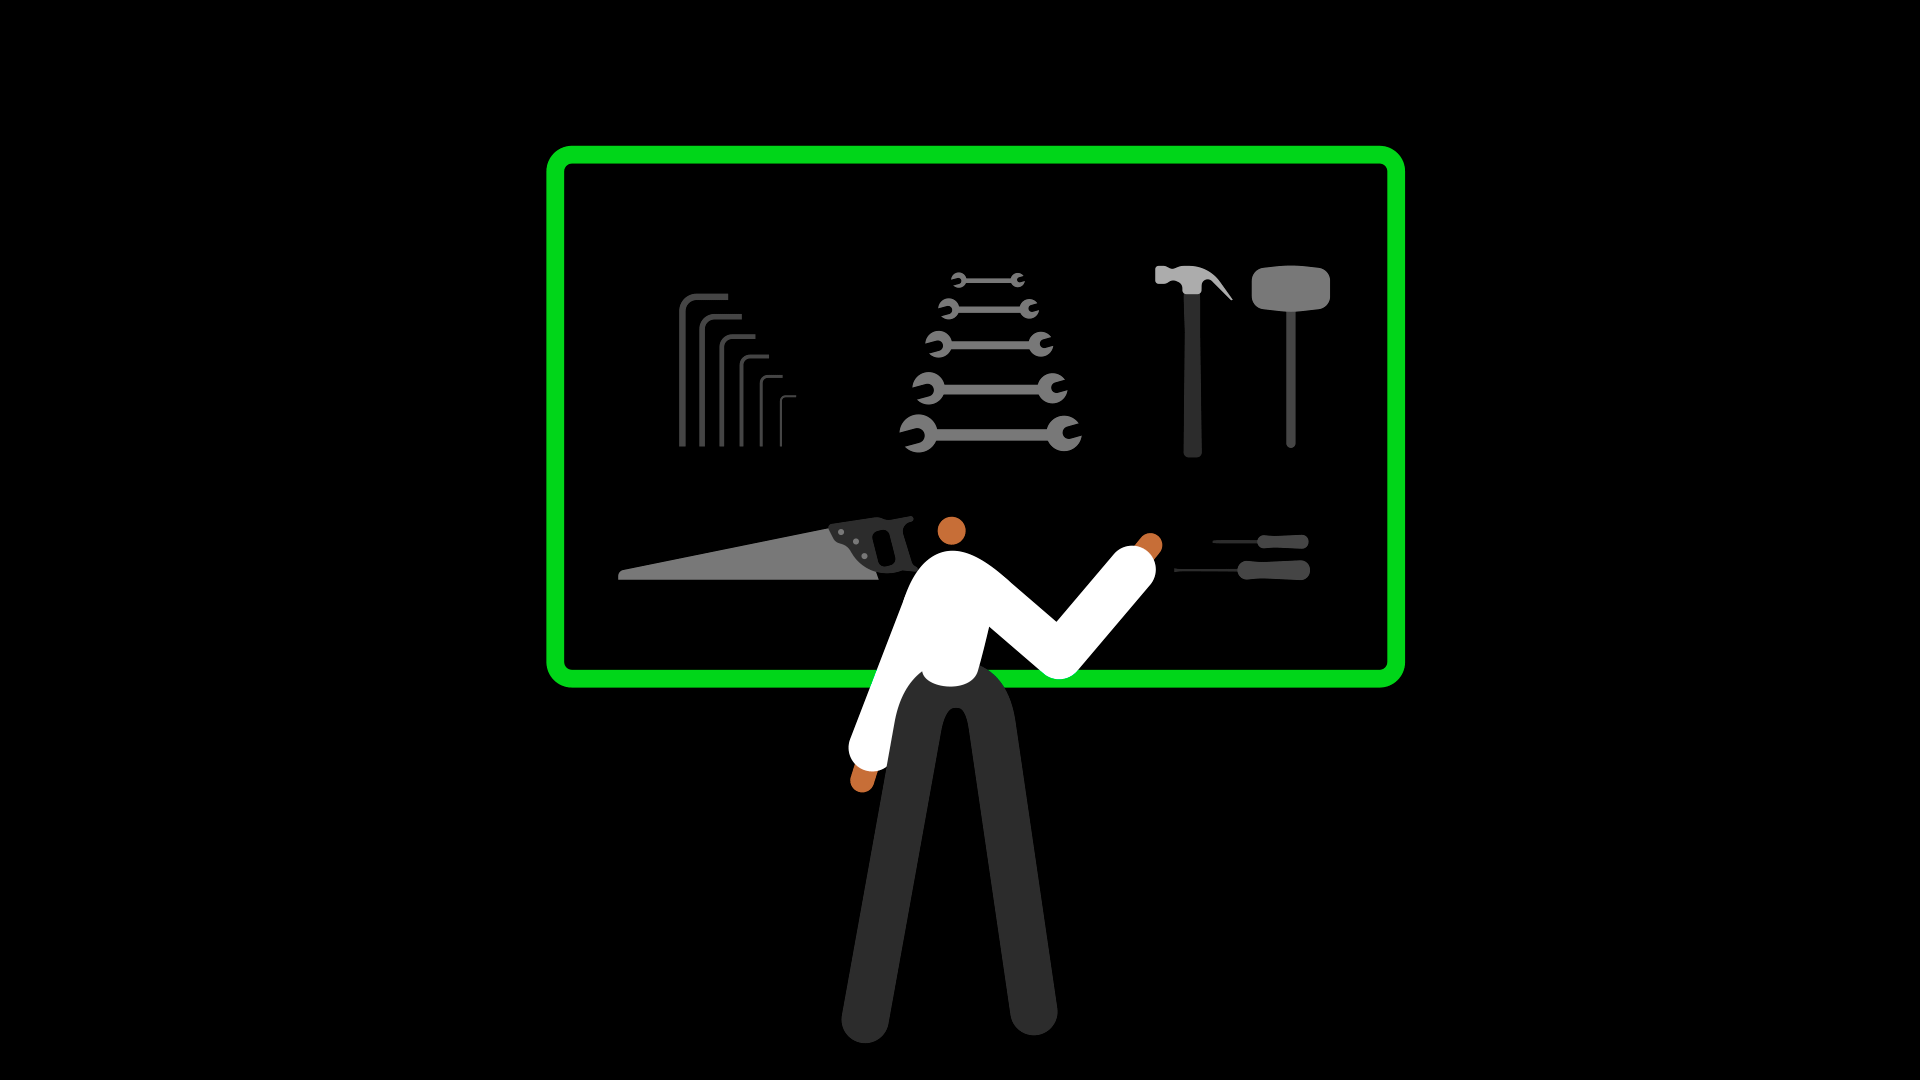 Illustration of a person choosing new tools